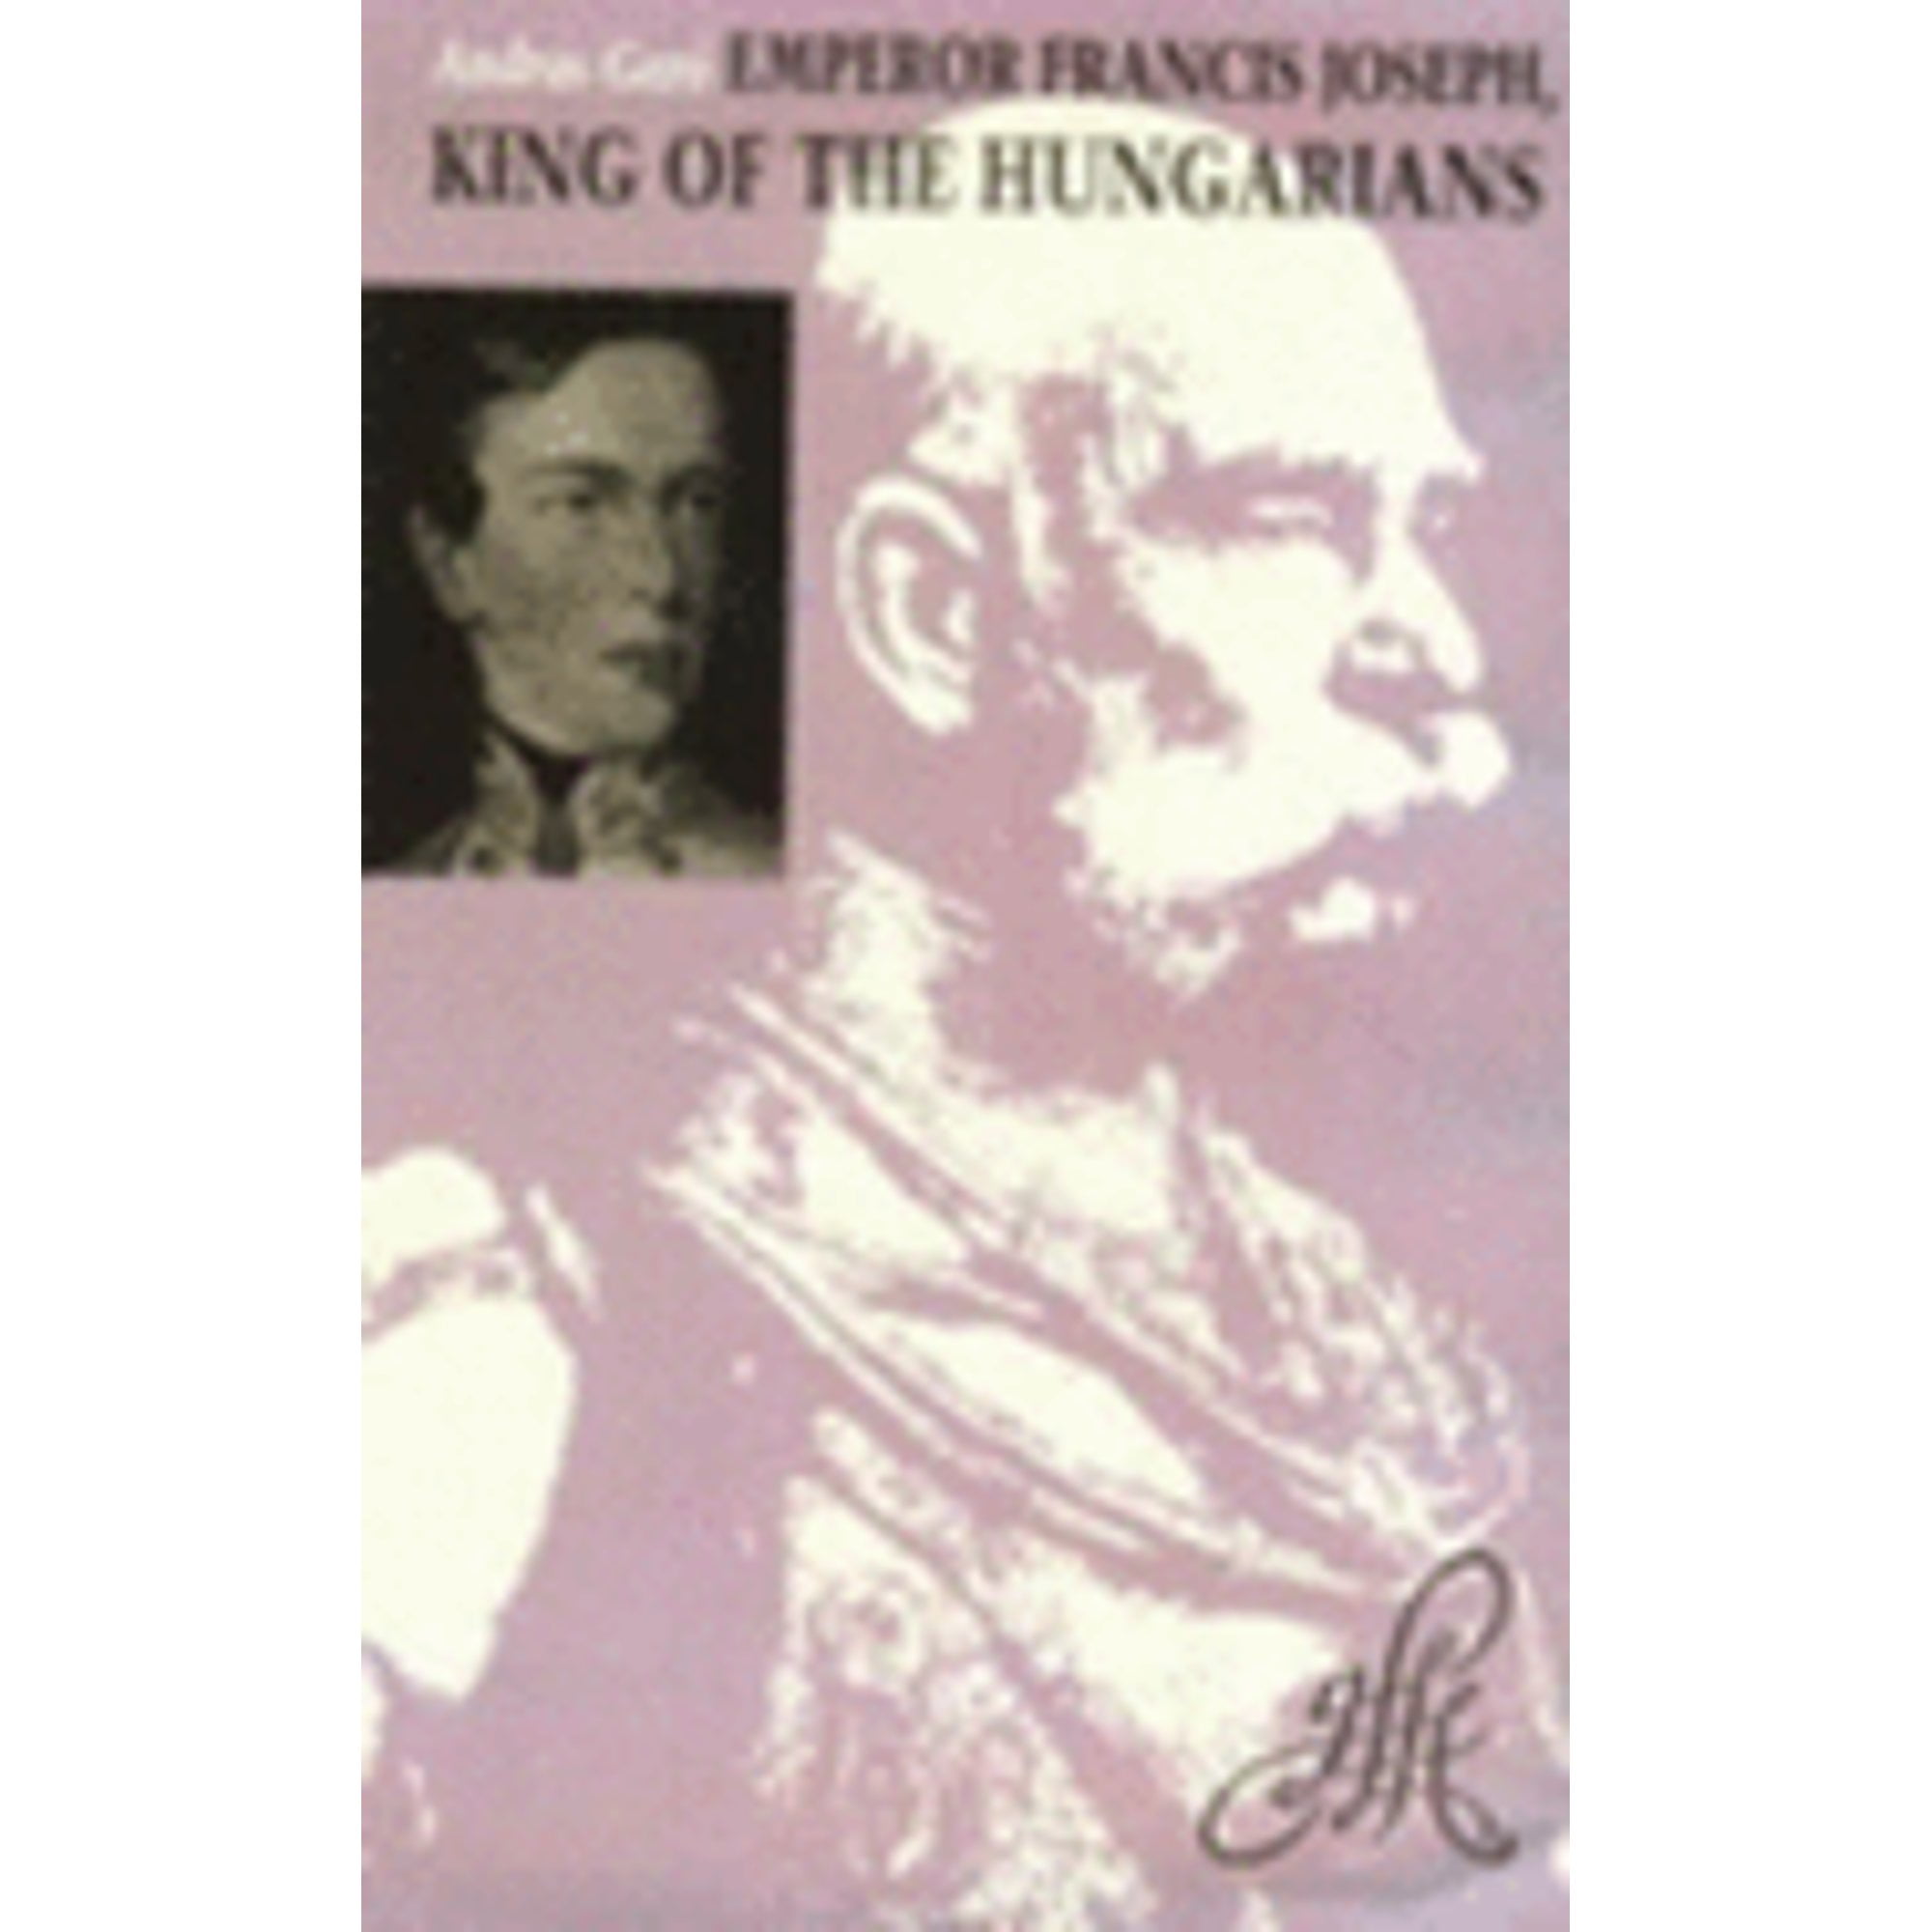 Pre-Owned Emperor Francis Joseph, King of the Hungarians (Hardcover 9780880334648) by Andras Ger